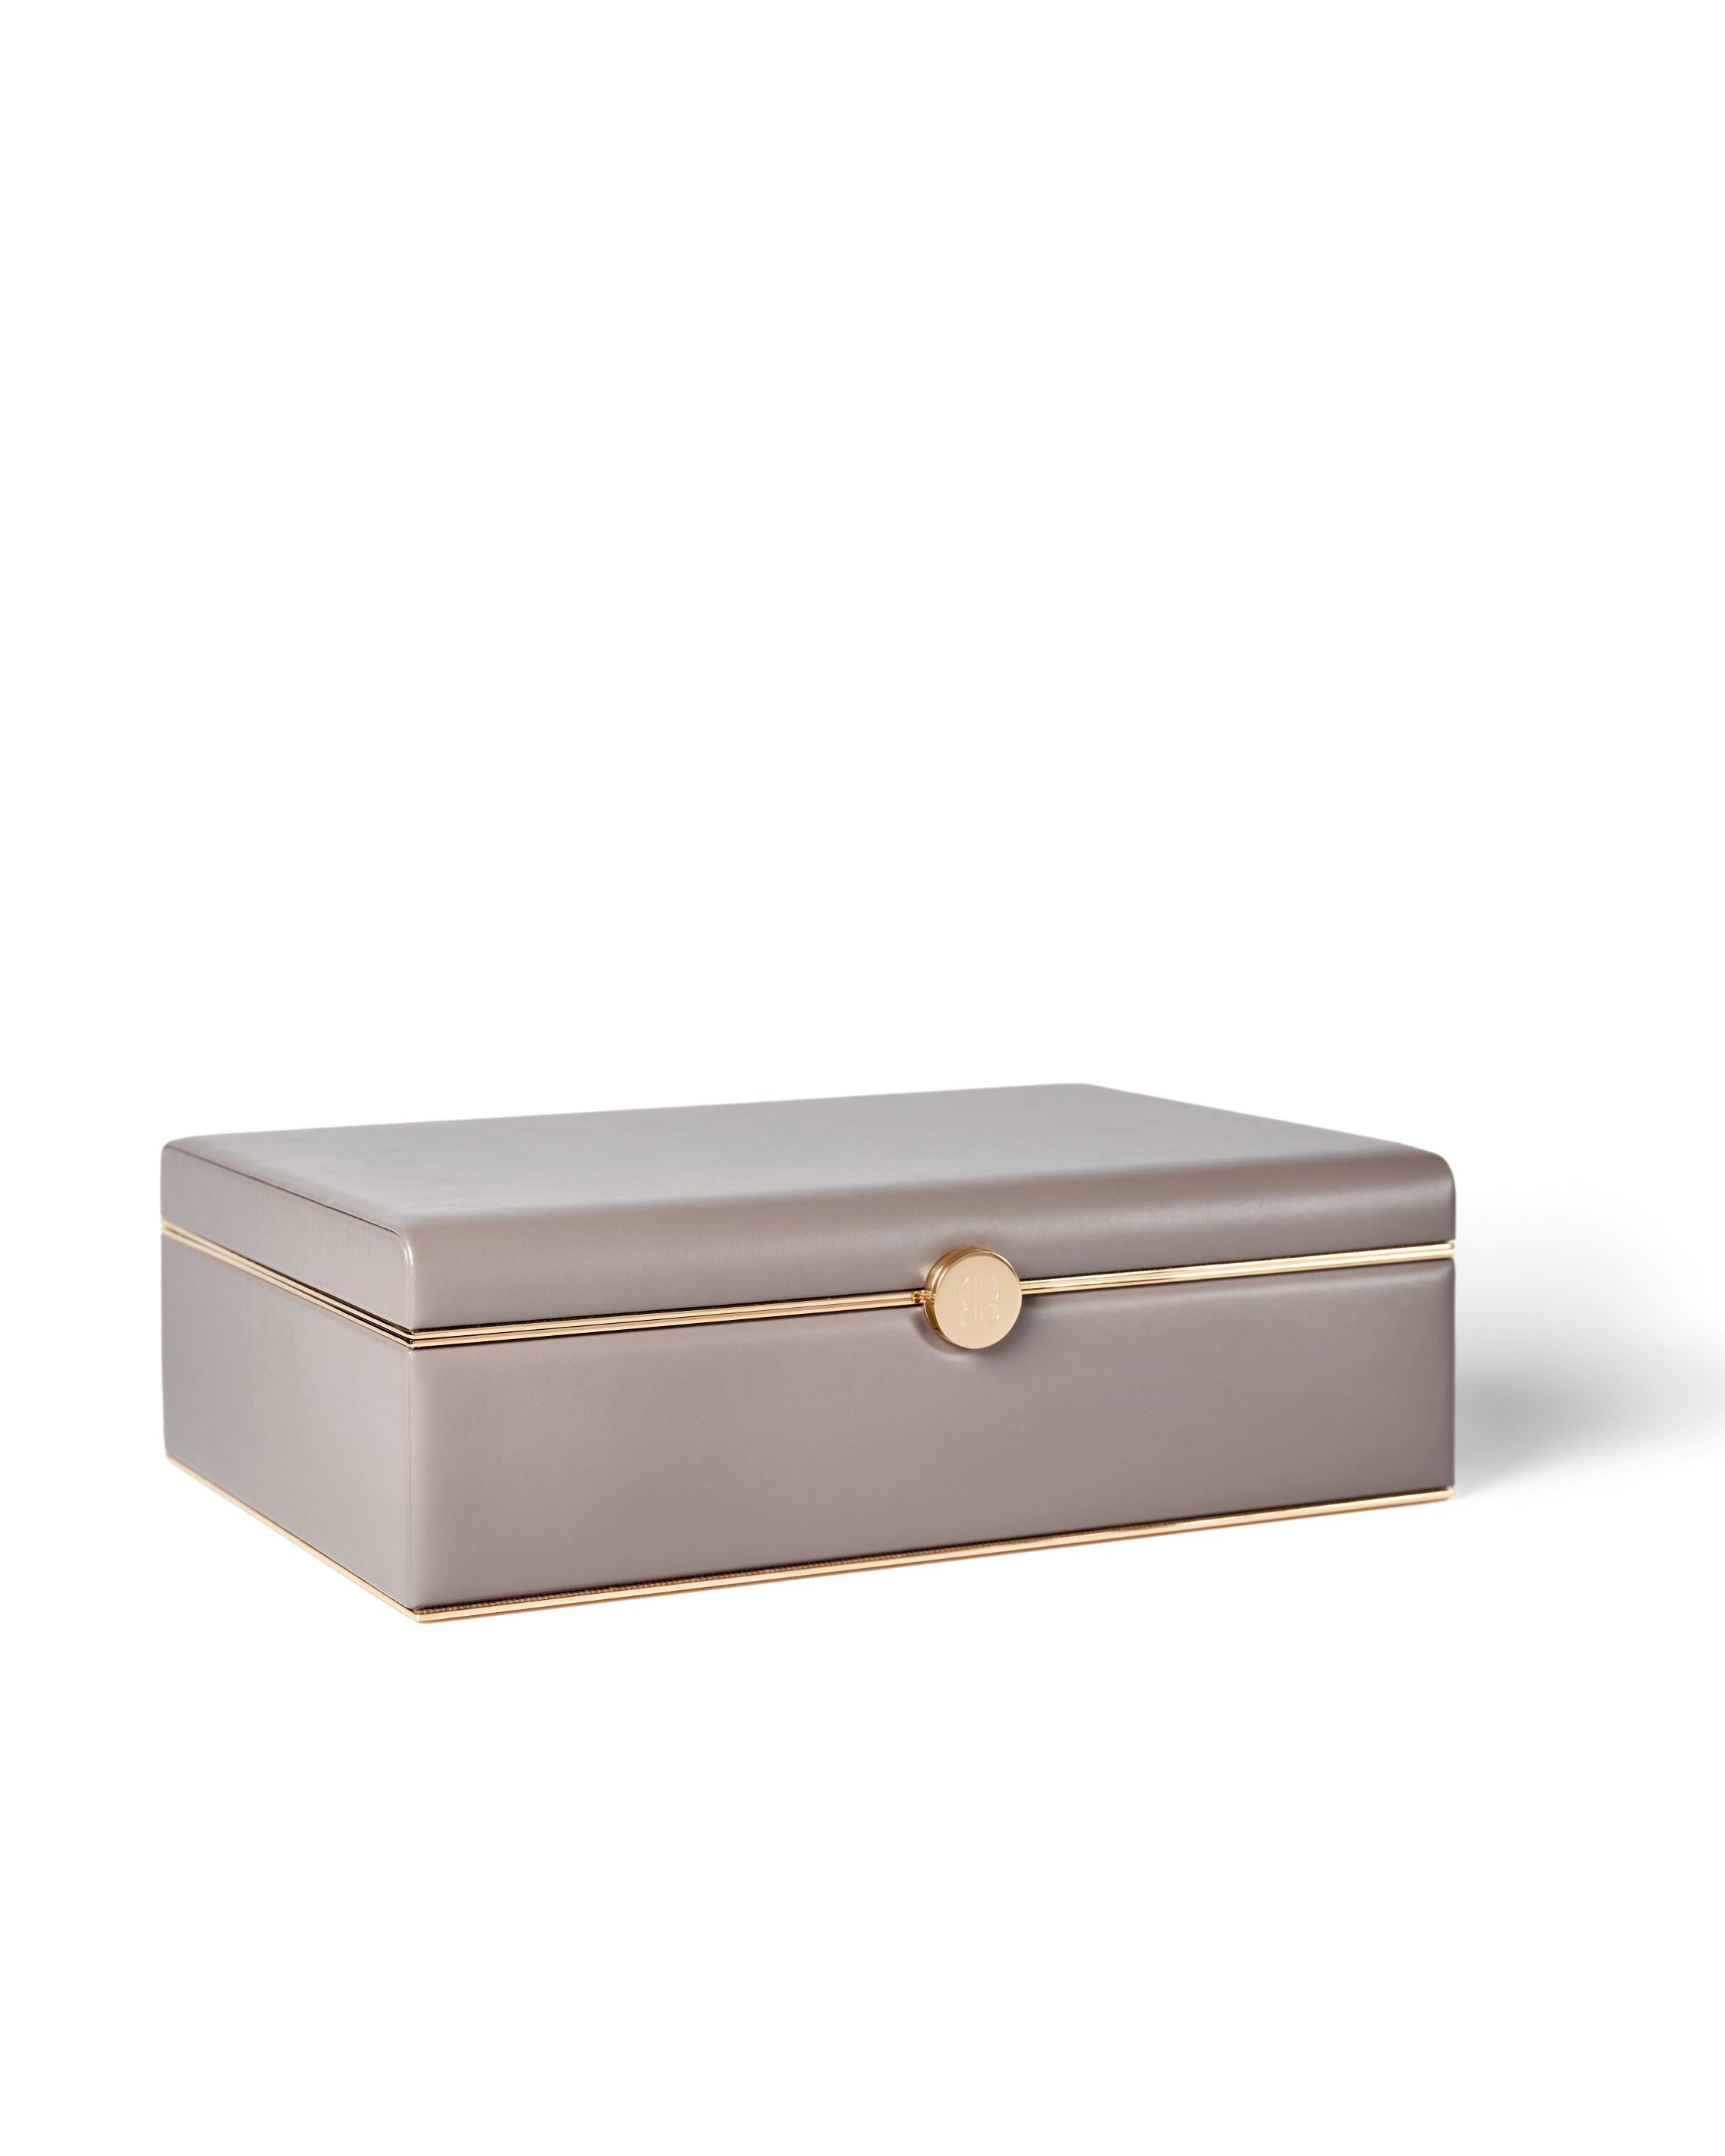 Bernardini Milano jewellery holder of light pink leather, yellow gold plated and silk - closed